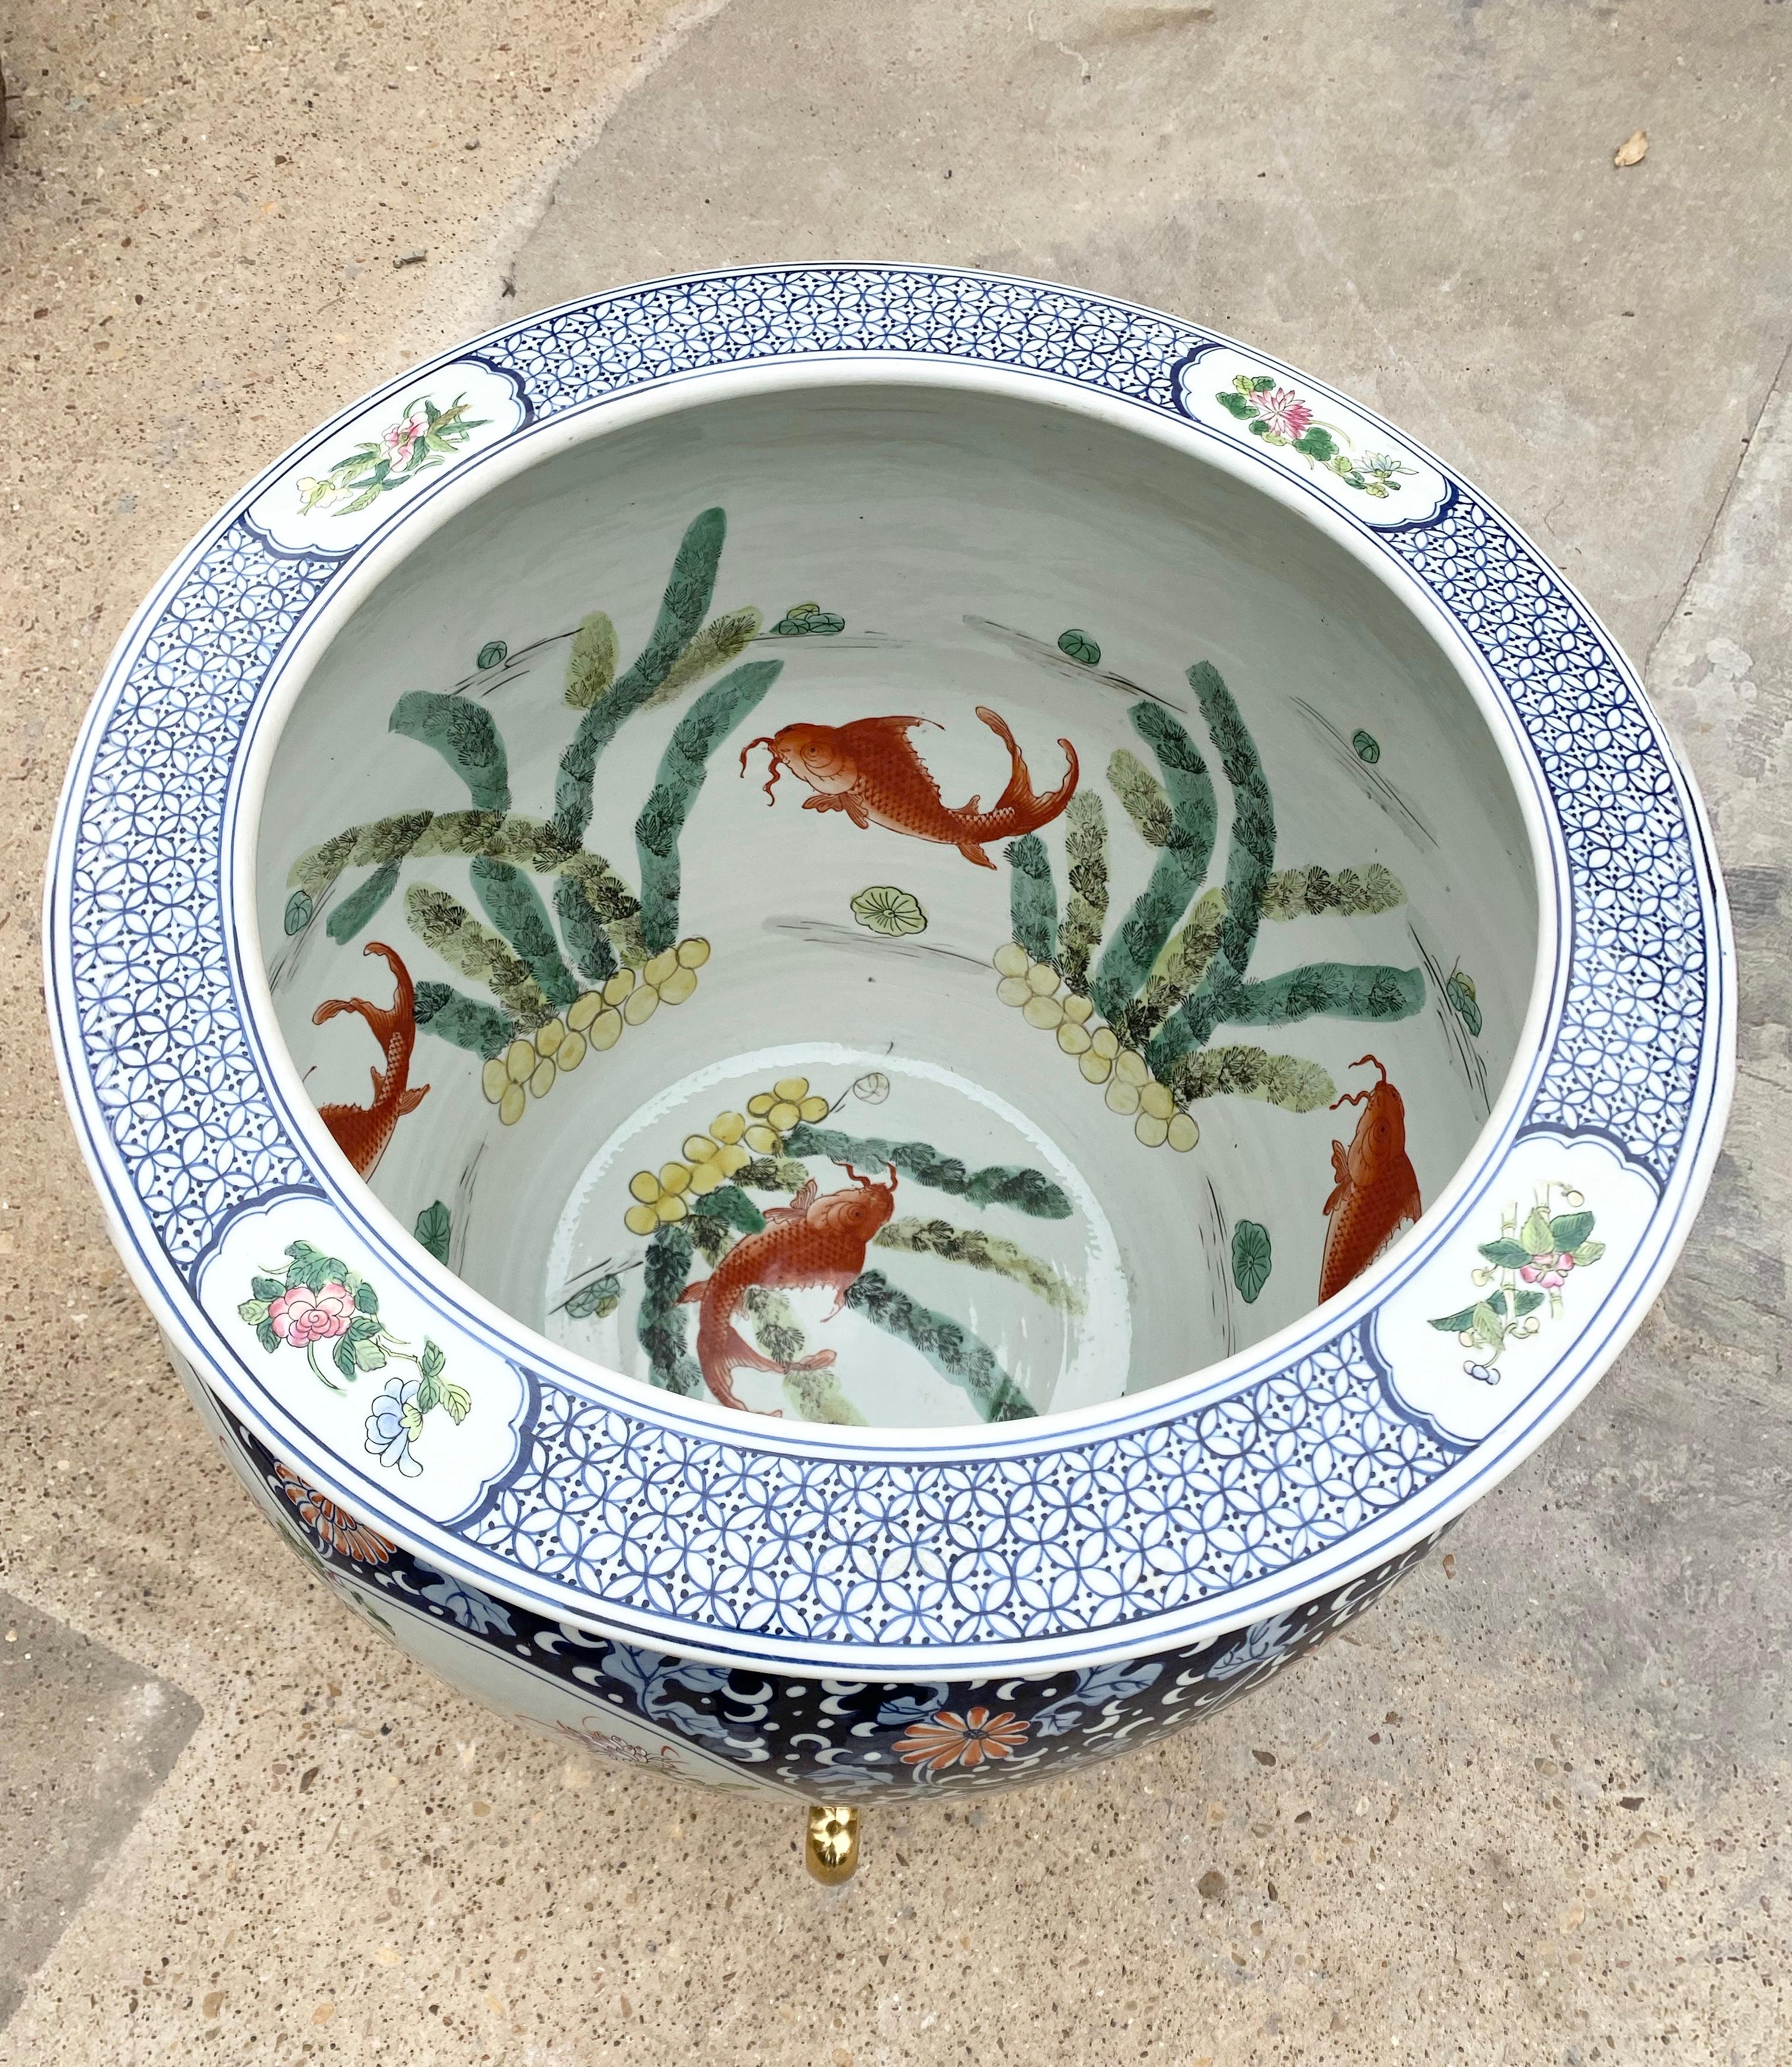 Chinese 19th century hand painted and fully glazed Chinese porcelain fishbowl planter, in excellent condition. Comes with stand. 

Measurements: 22